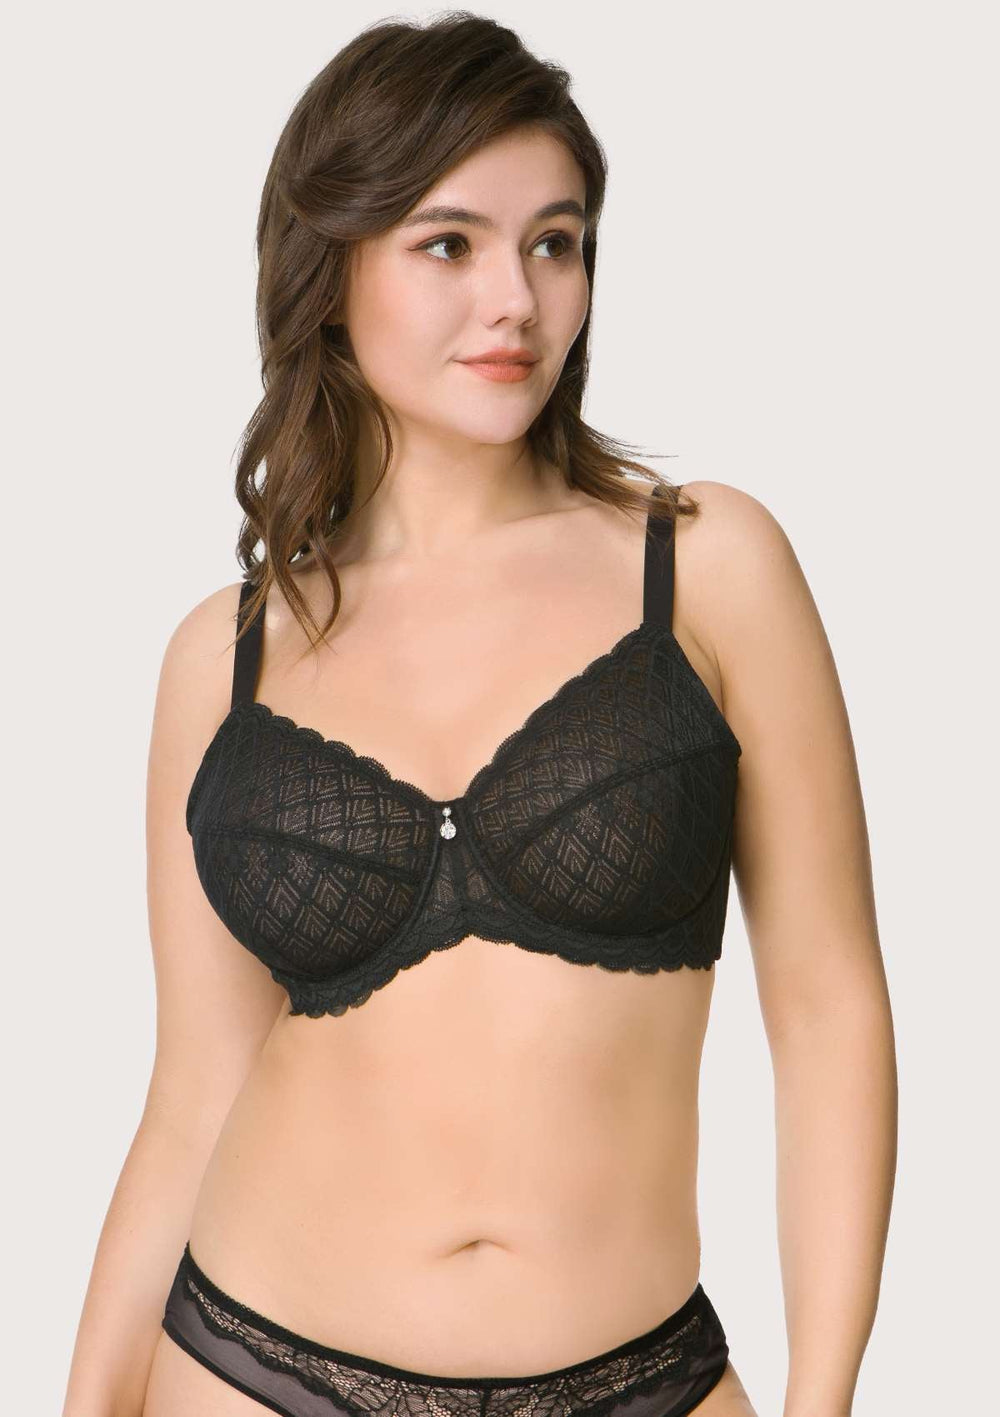 34-48C-H,I,J,K Plus Size Bra Underwire Full Coverage Wide Strap Soft  Unlined Cup 